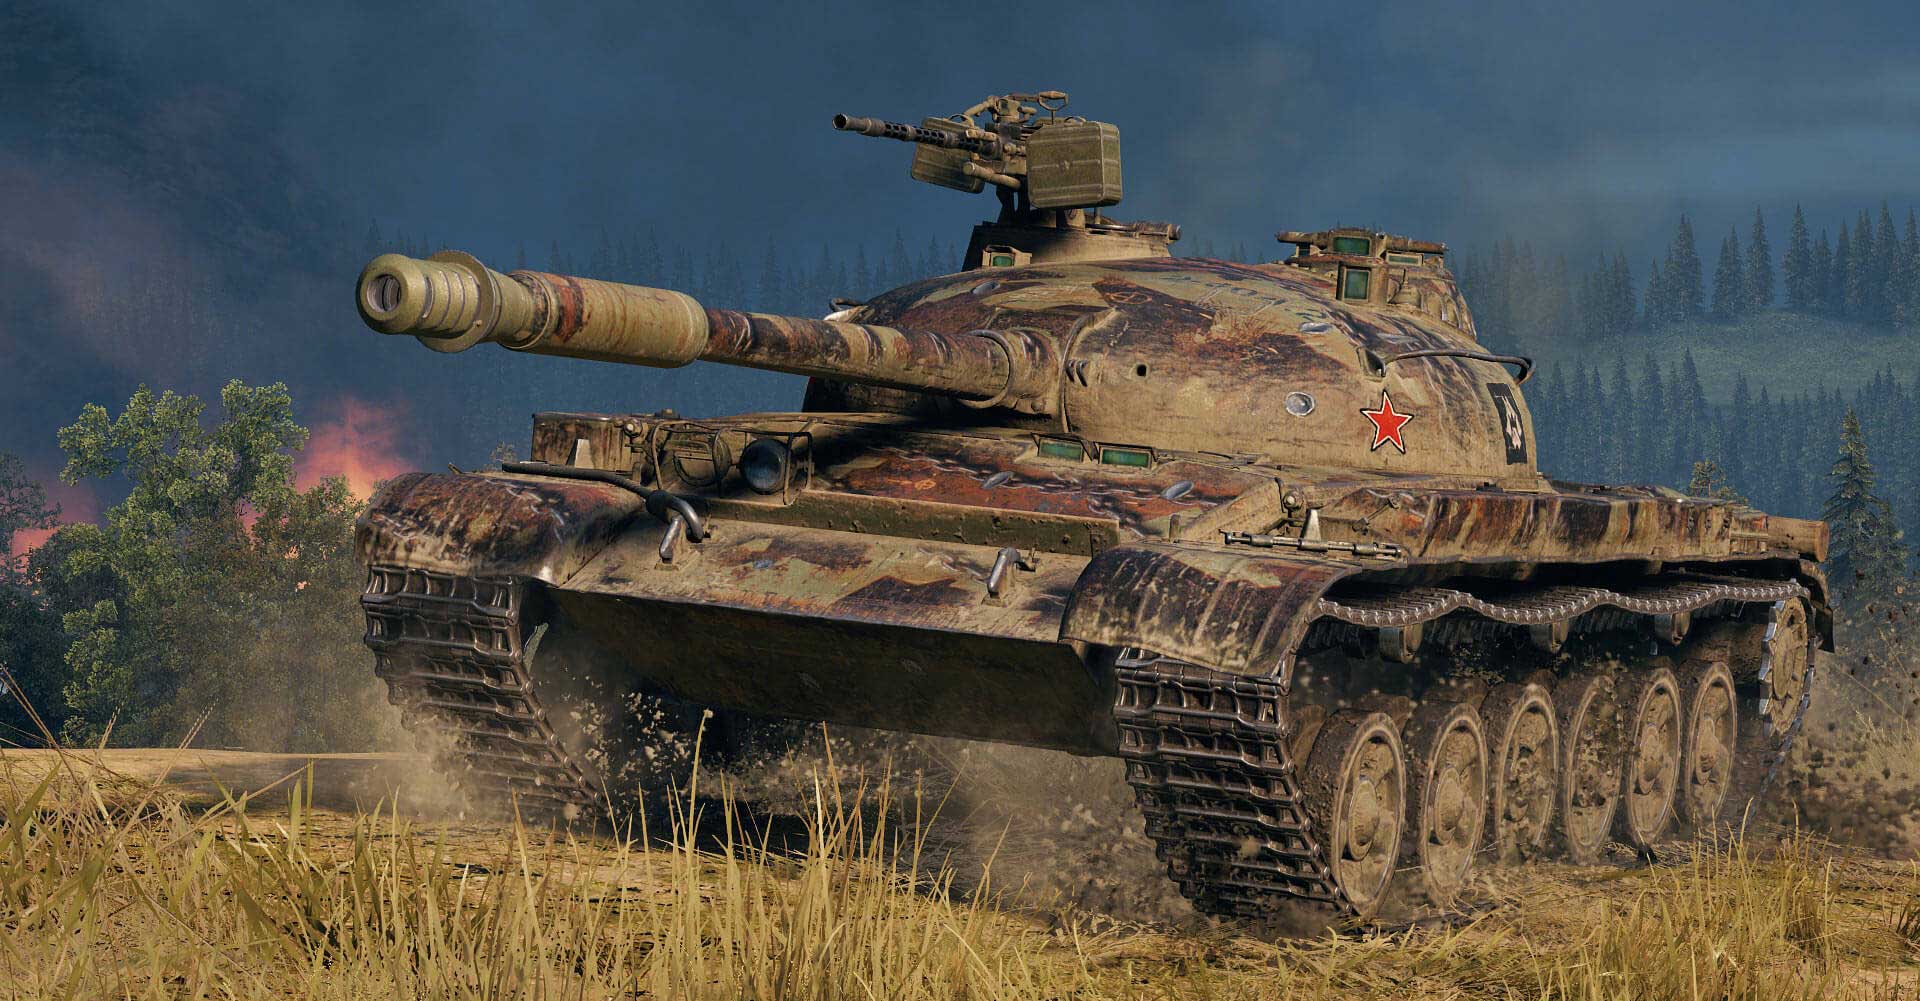 World of Tanks’ Steel Hunter battle royale event is back this week